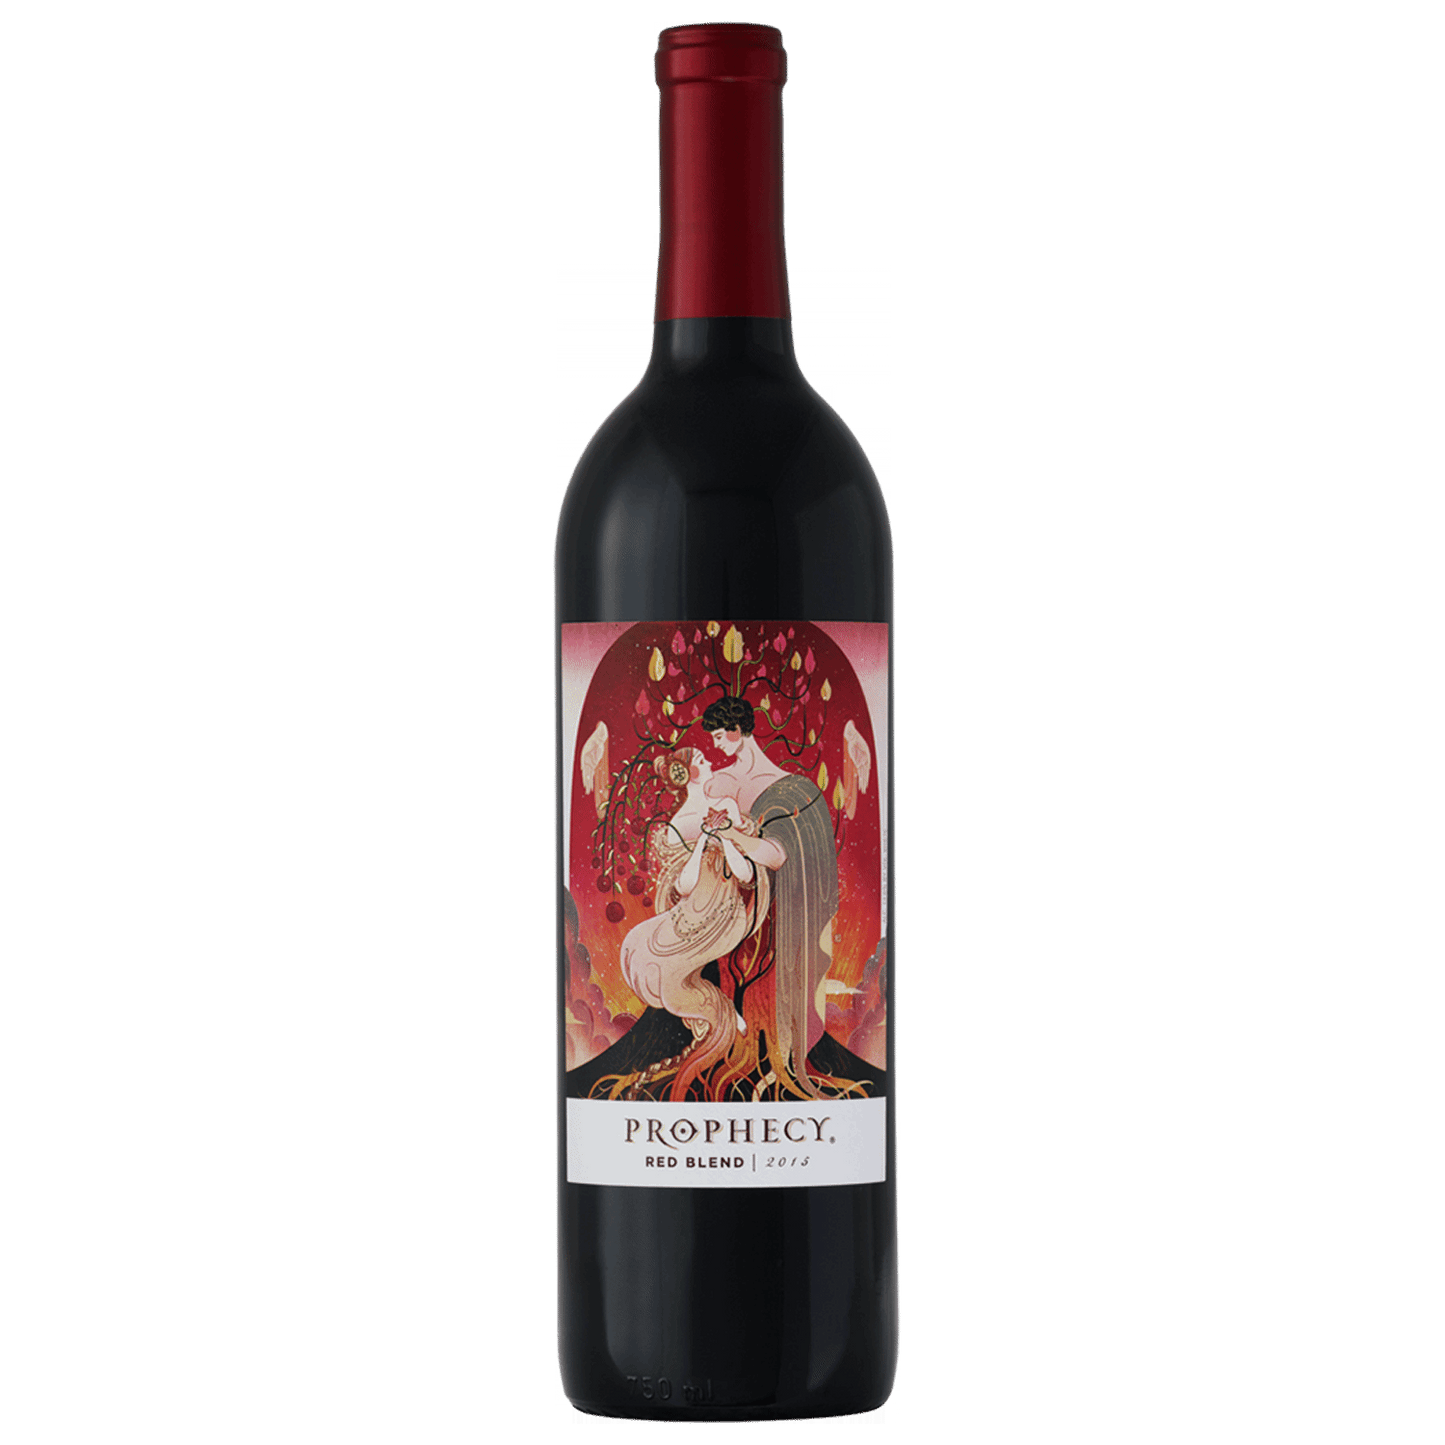 PROPHECY RED BLEND